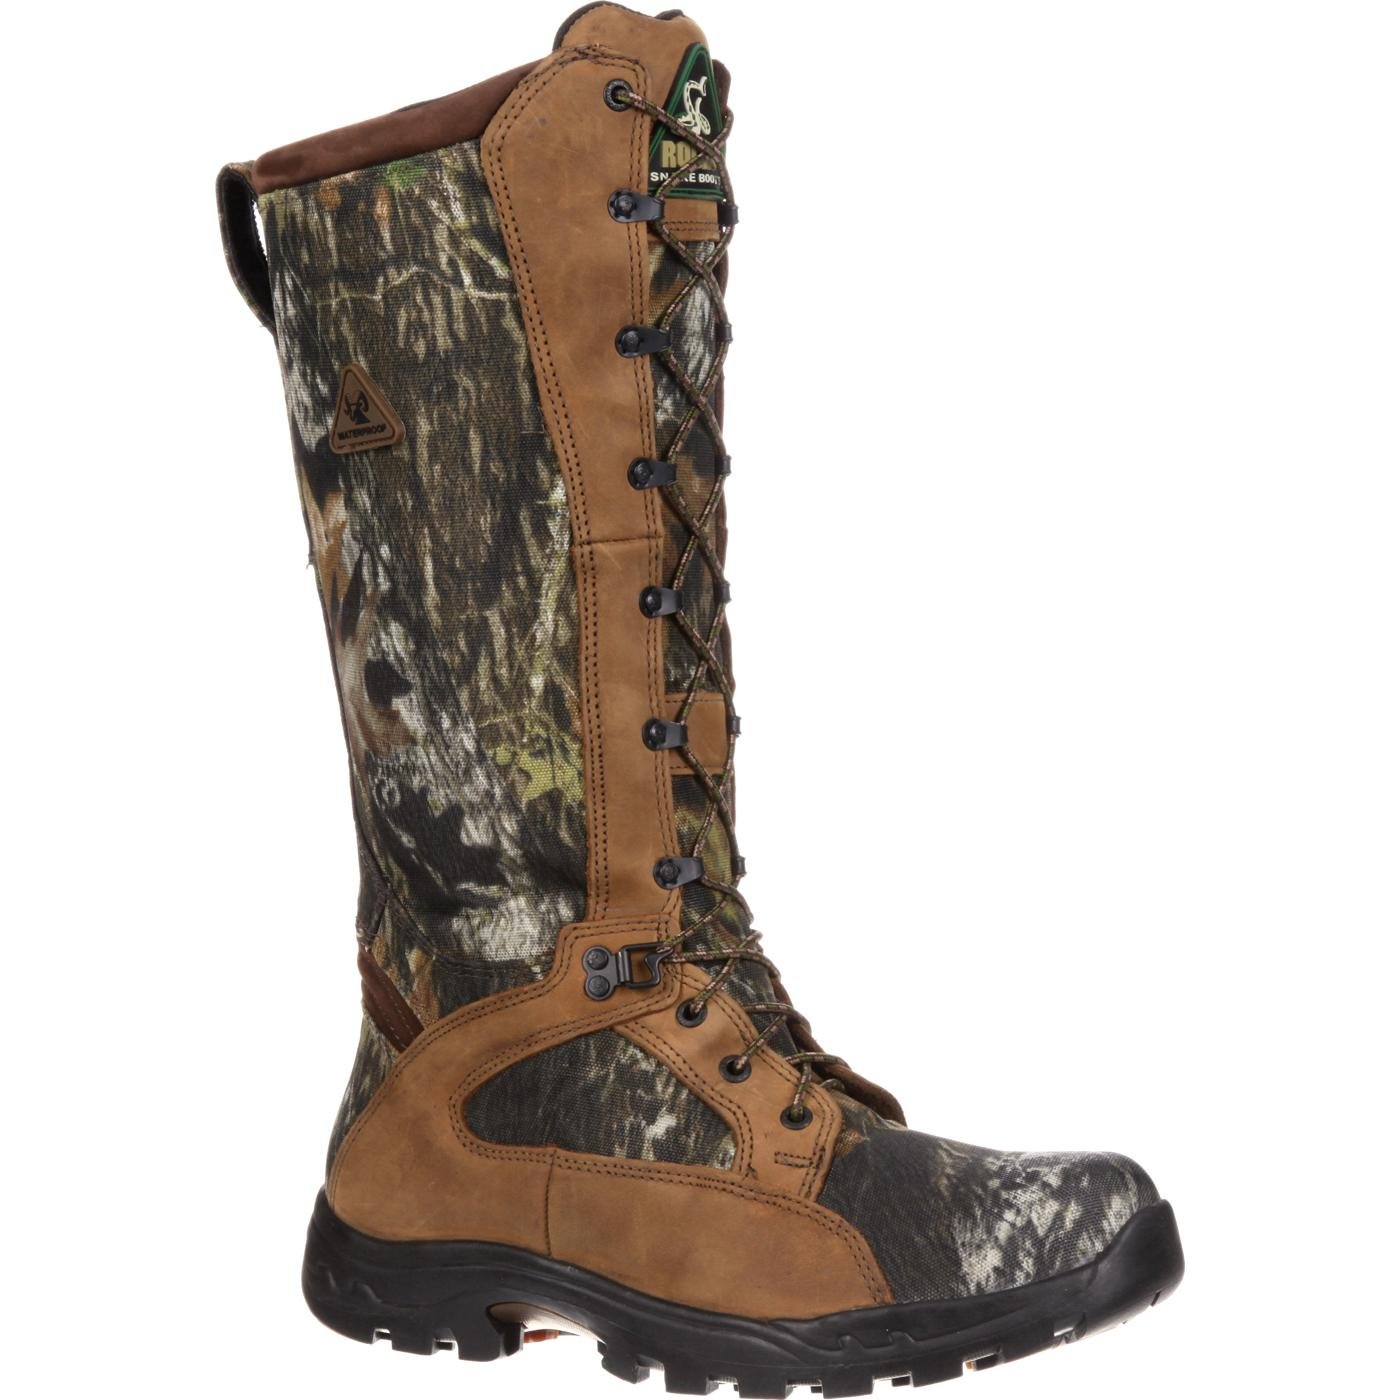 Rocky Boots ProLight Waterproof Camouflage Snakeproof Boots in unisex sizing